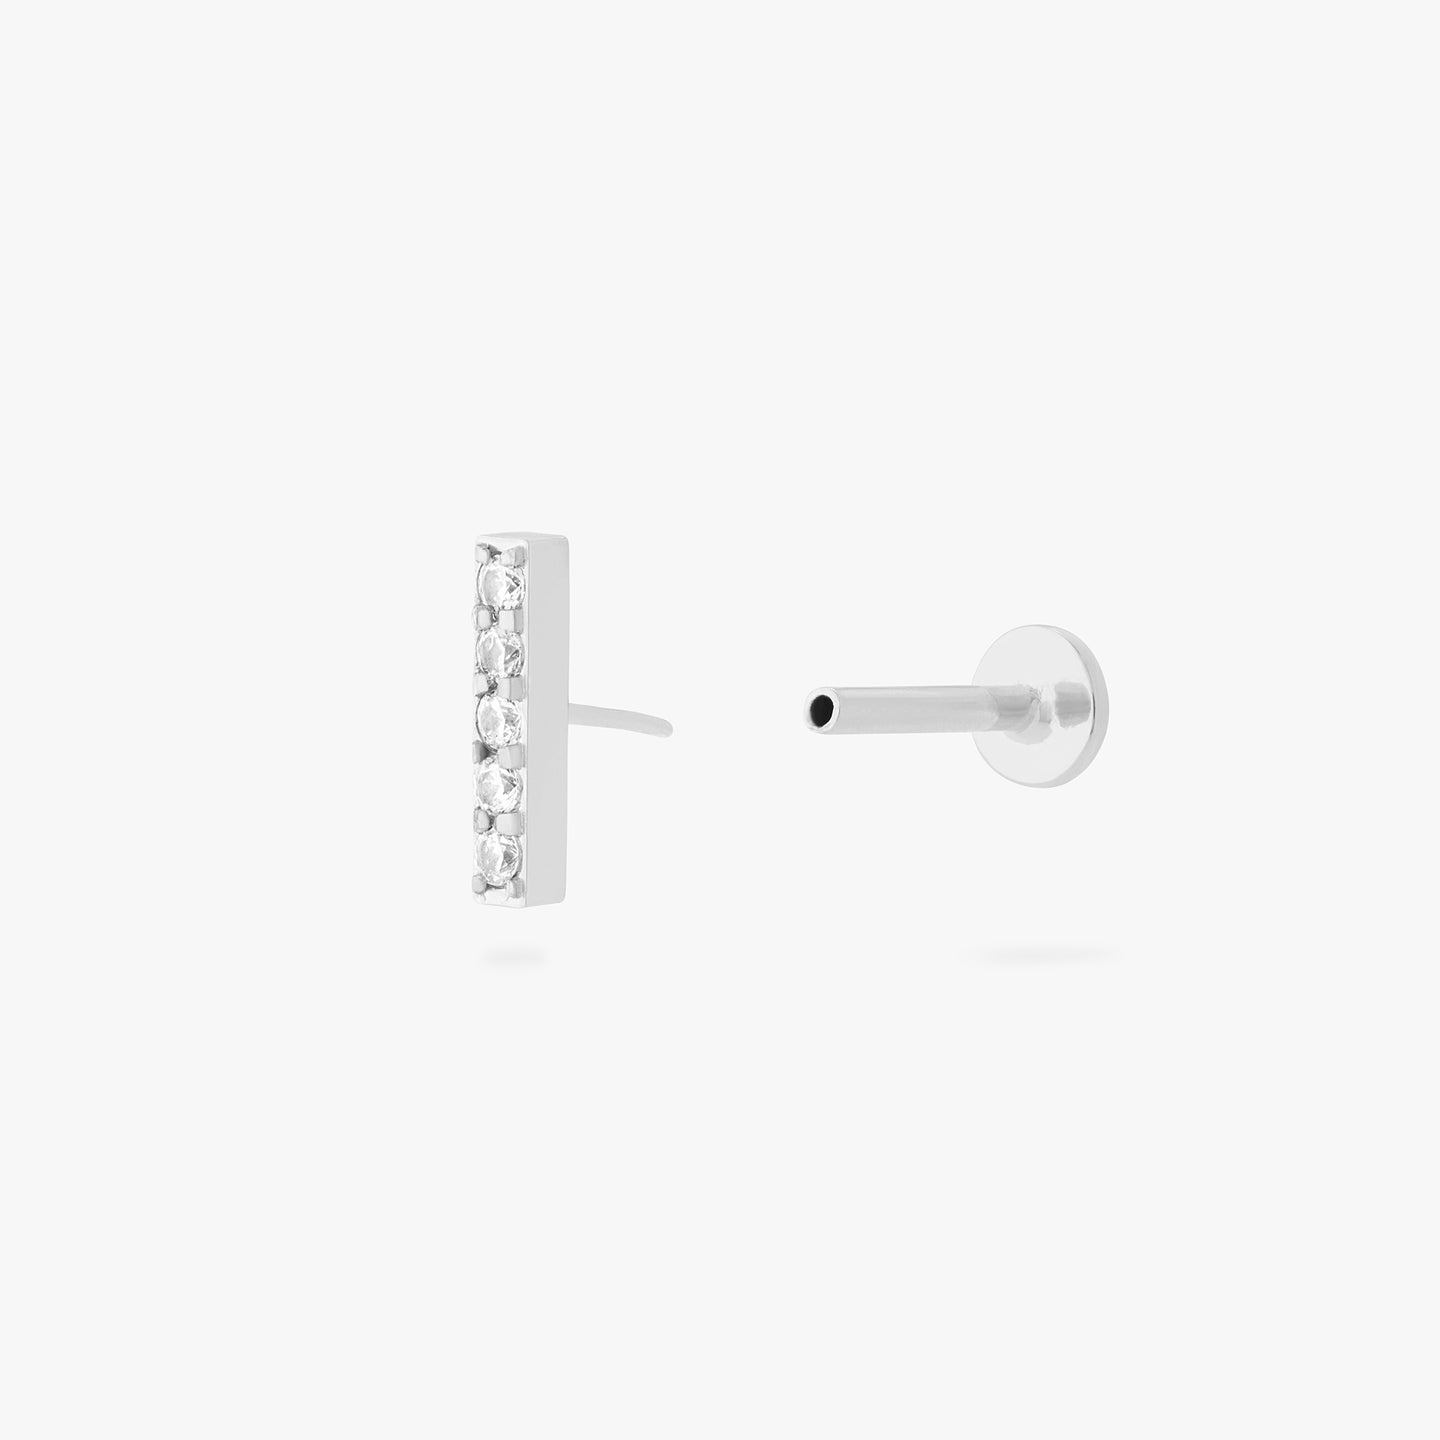 This is an image of a silver/clear bar that has 5 mini CZs in a line formation with a silver labret with a circle disc and the 